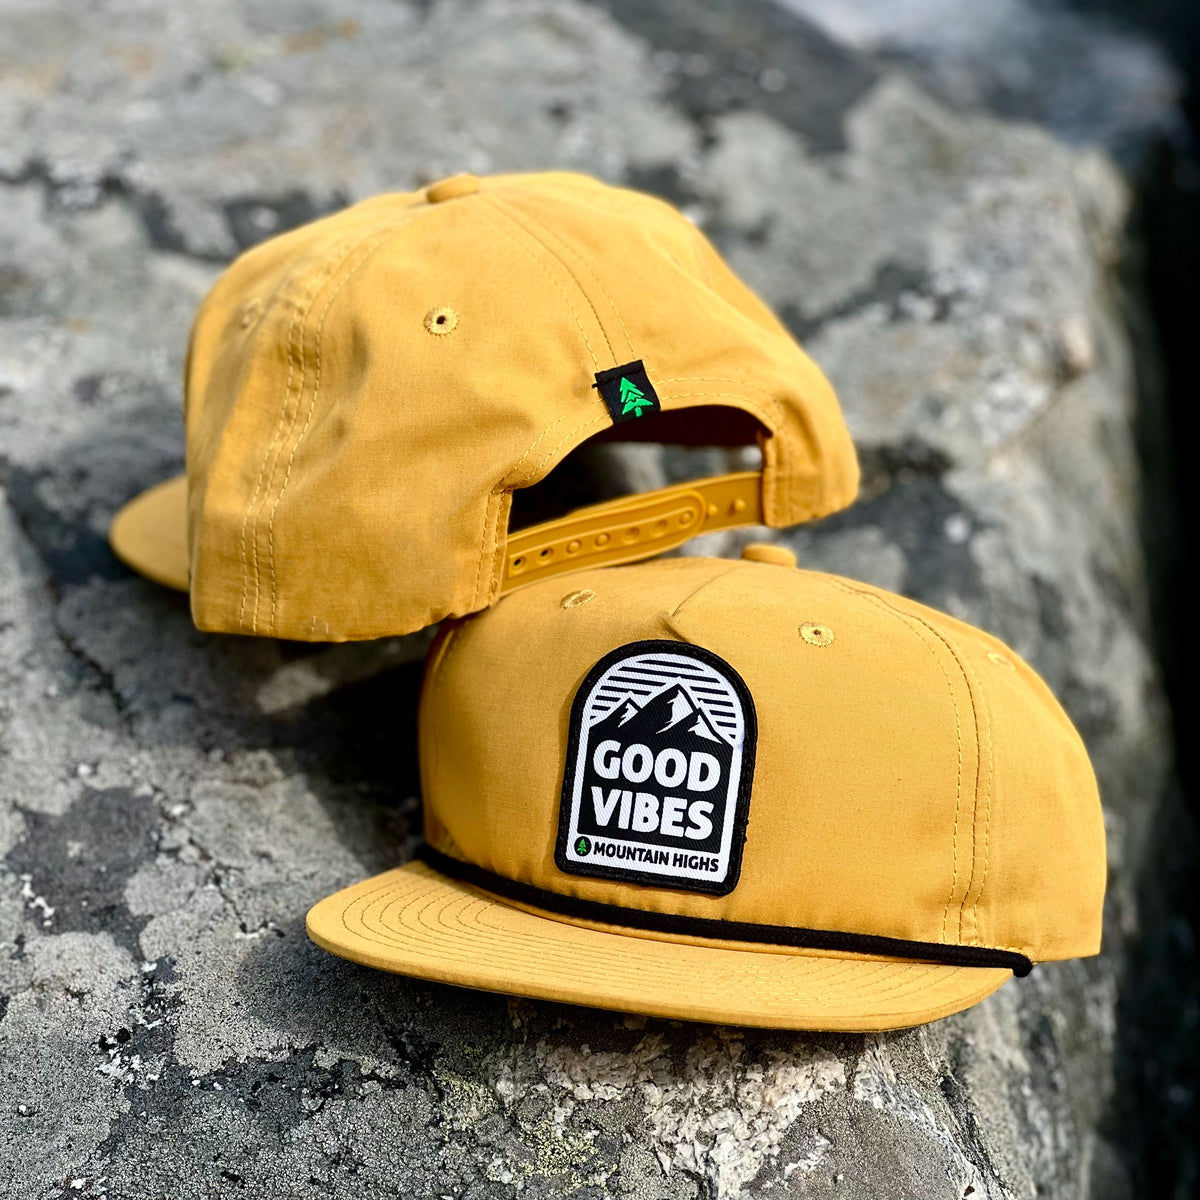 Good Vibes &amp; Mountain Highs 5 Panel Vintage Cap with Rope